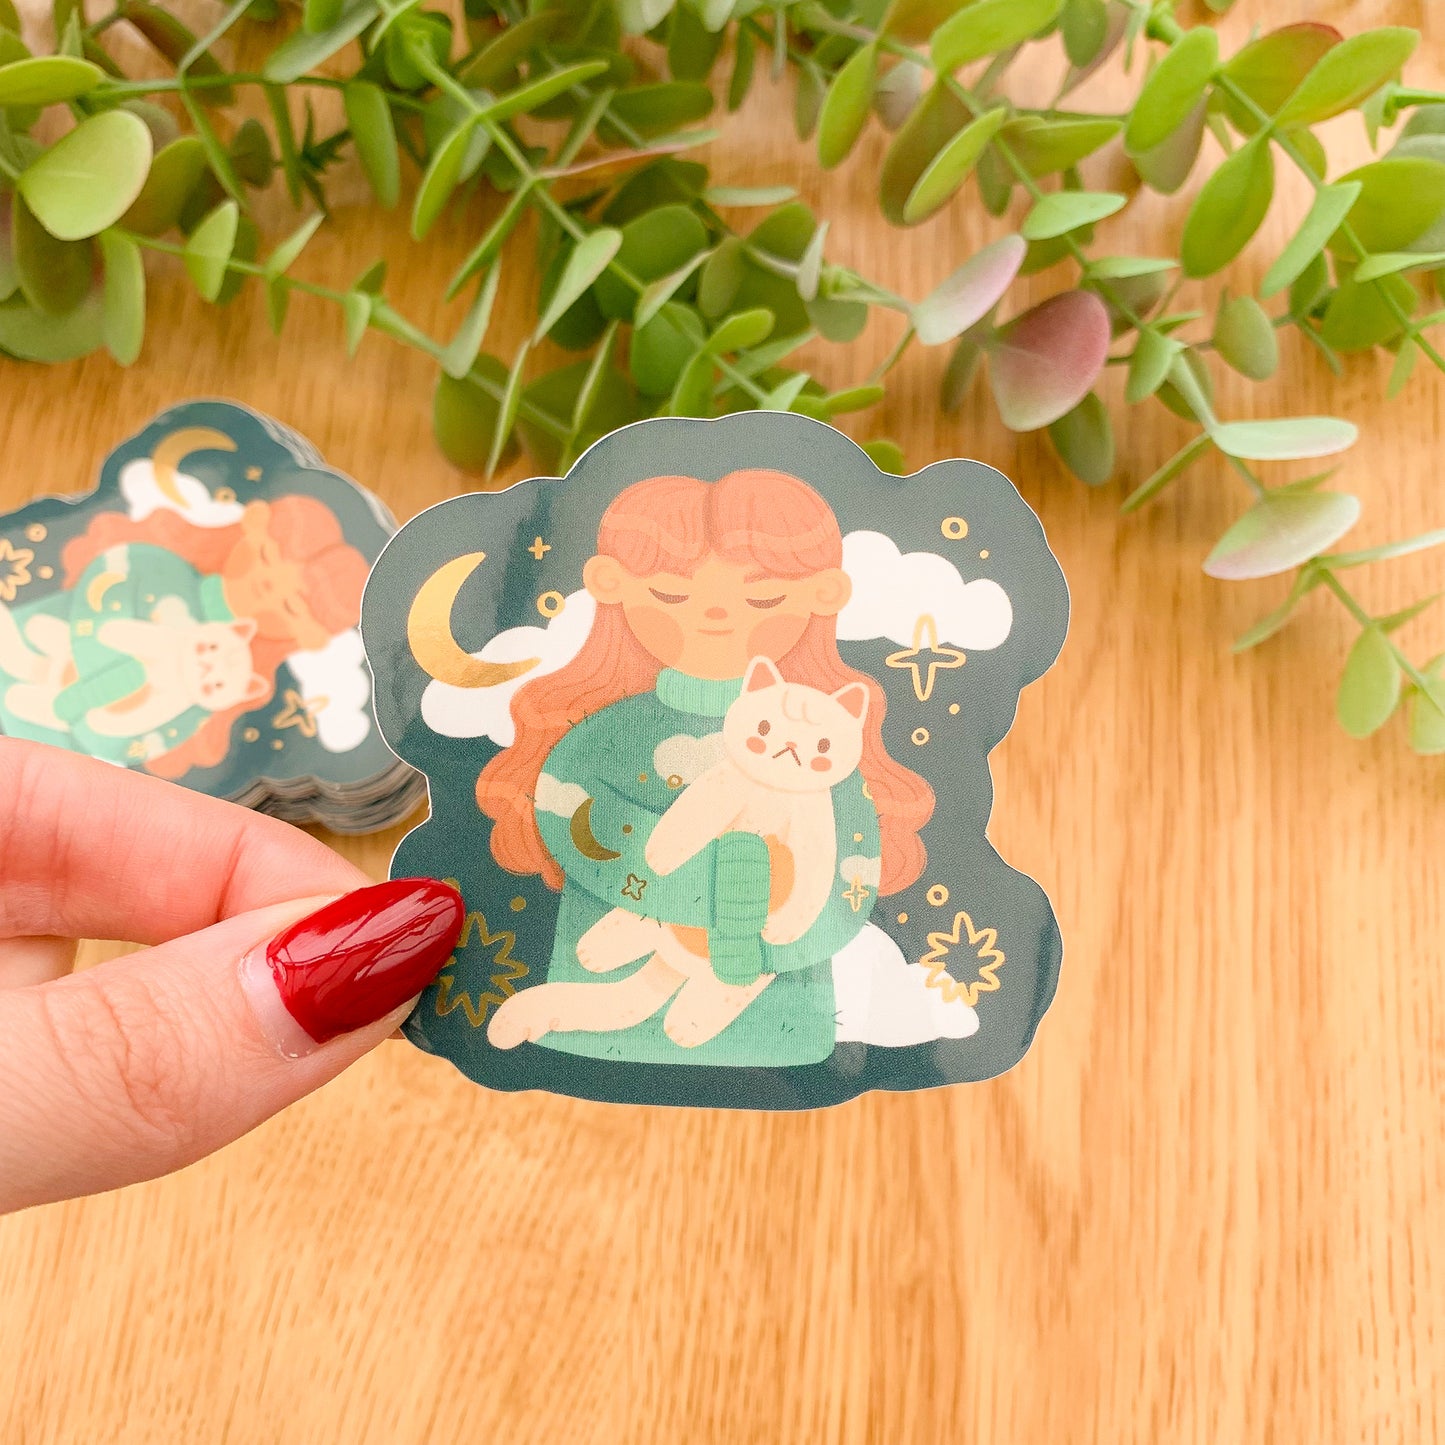 Moon and Clouds Girl Metallic Sticker - Limited Edition Patreon vinyl stickers